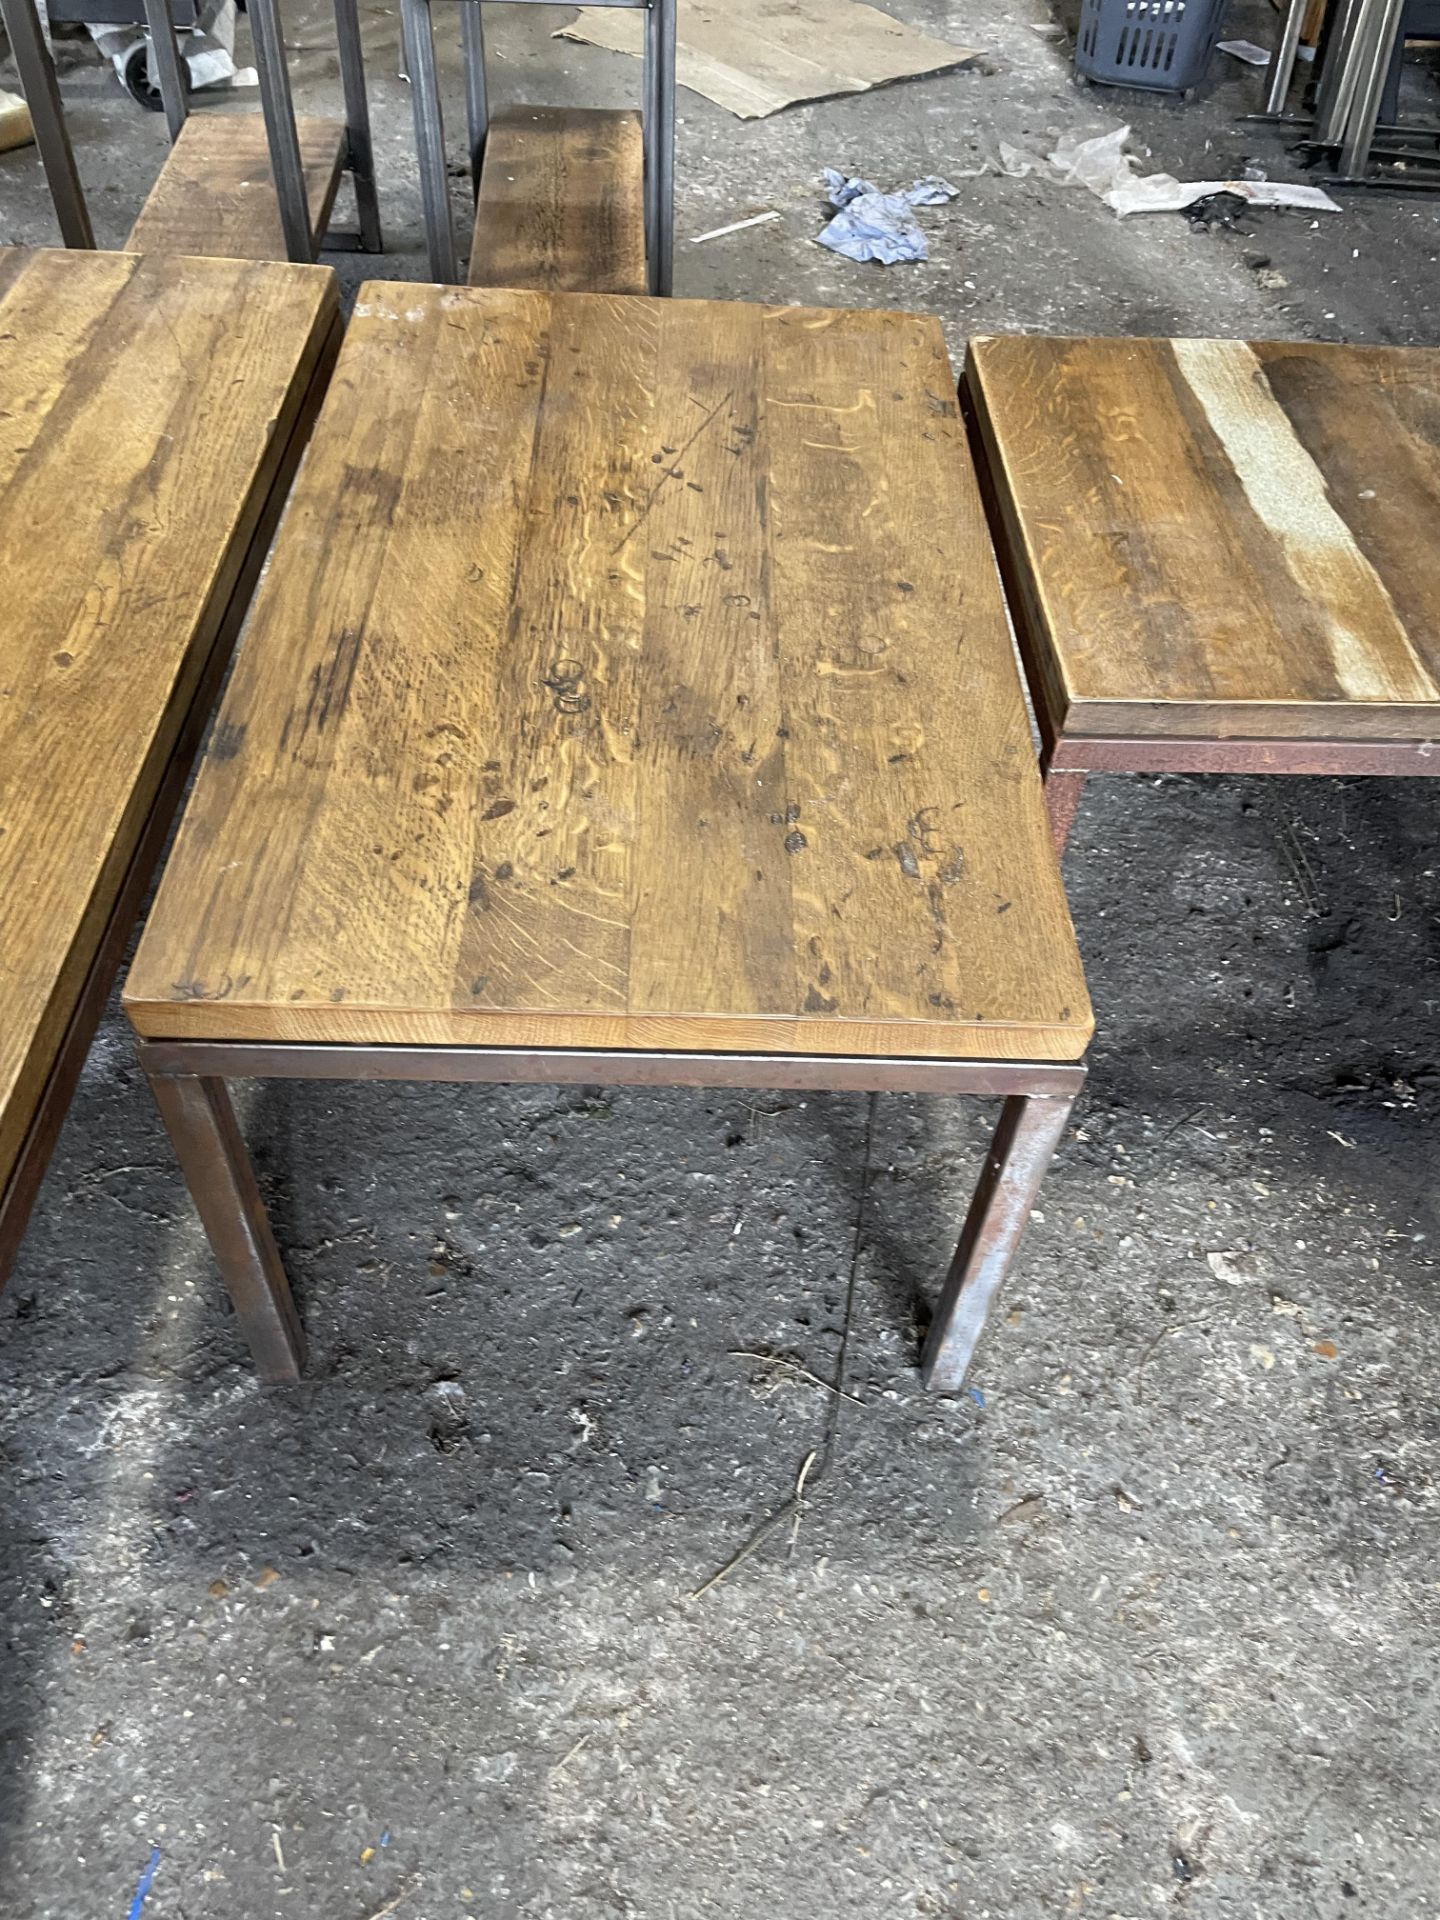 3 x Coffee/Side tables - (113cm x 45cm, 45cm x 72cm and 45cm x 45cm, all approx. 40cm high). - Image 3 of 3